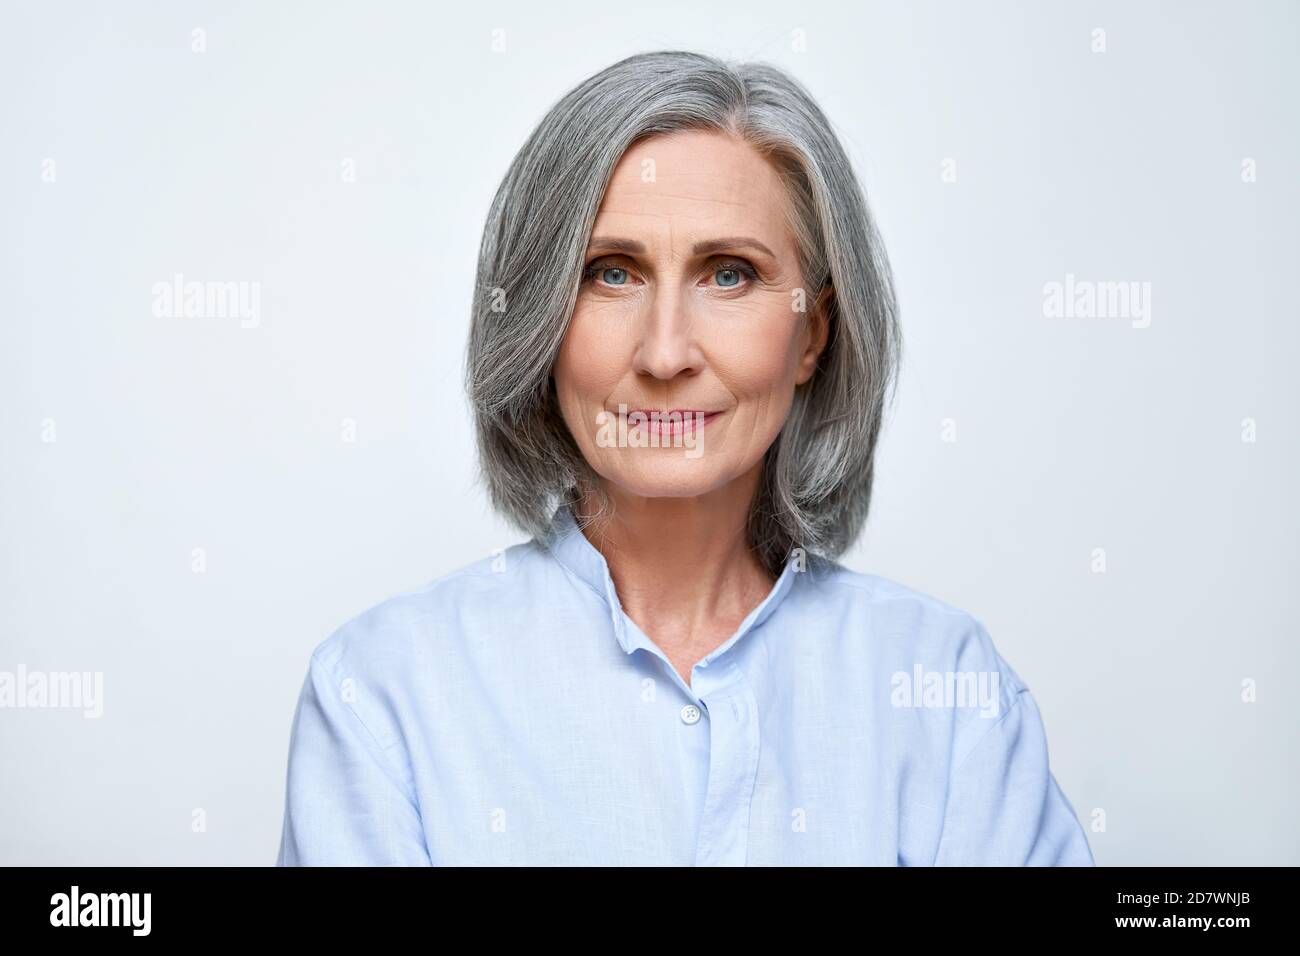 Headshot Female Corporate Hi Res Stock Photography And Images Alamy